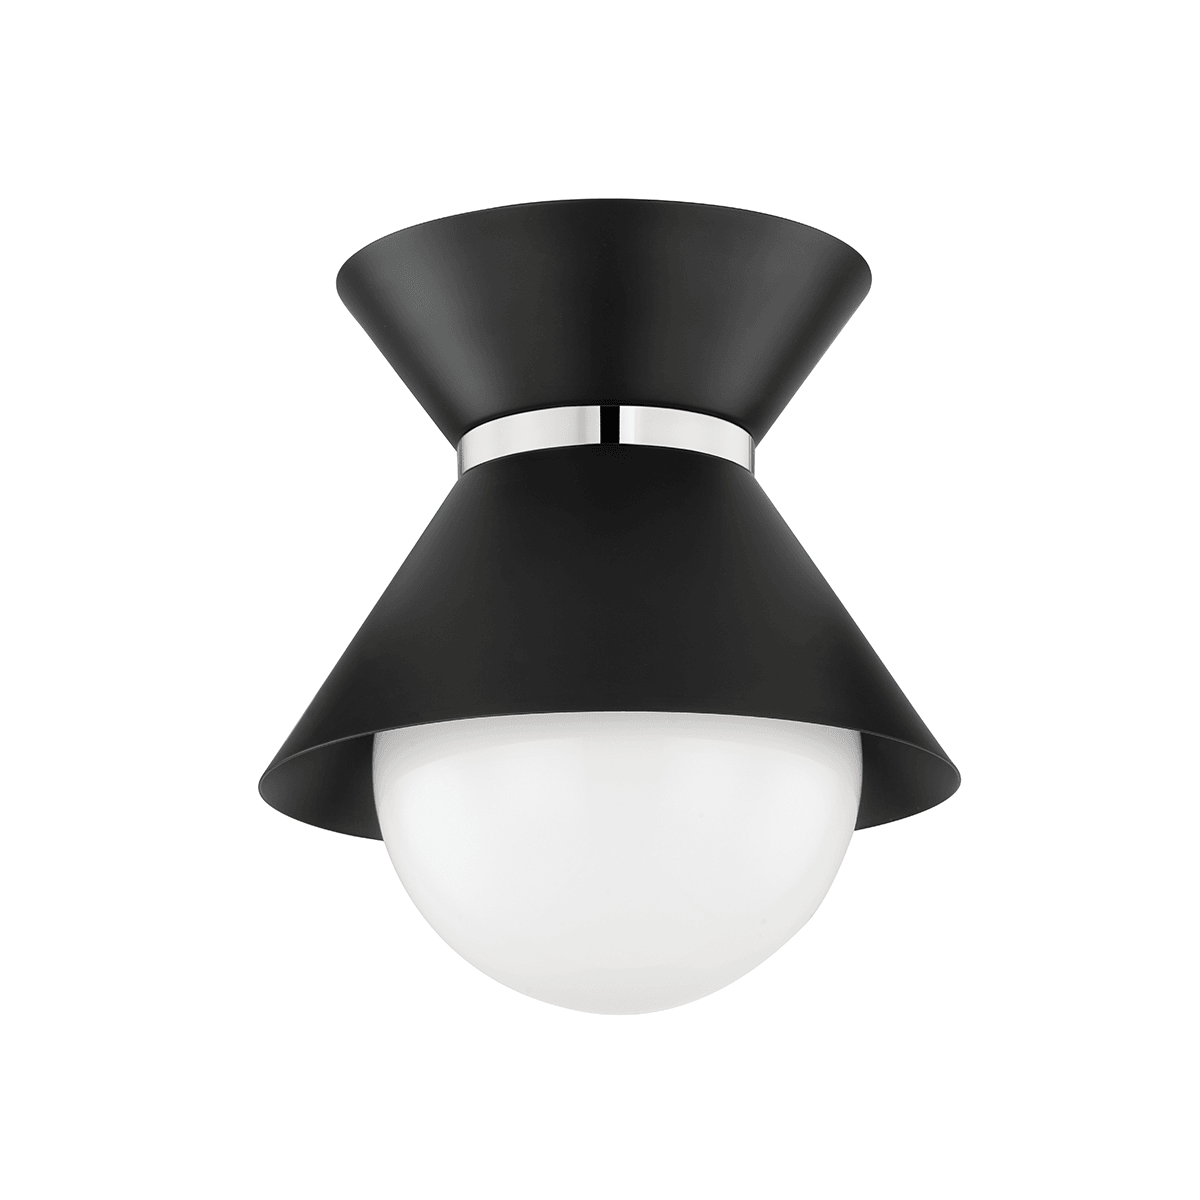 Steel Conical Shade with Opal Shiny Glass Diffuser Flush Mount - LV LIGHTING